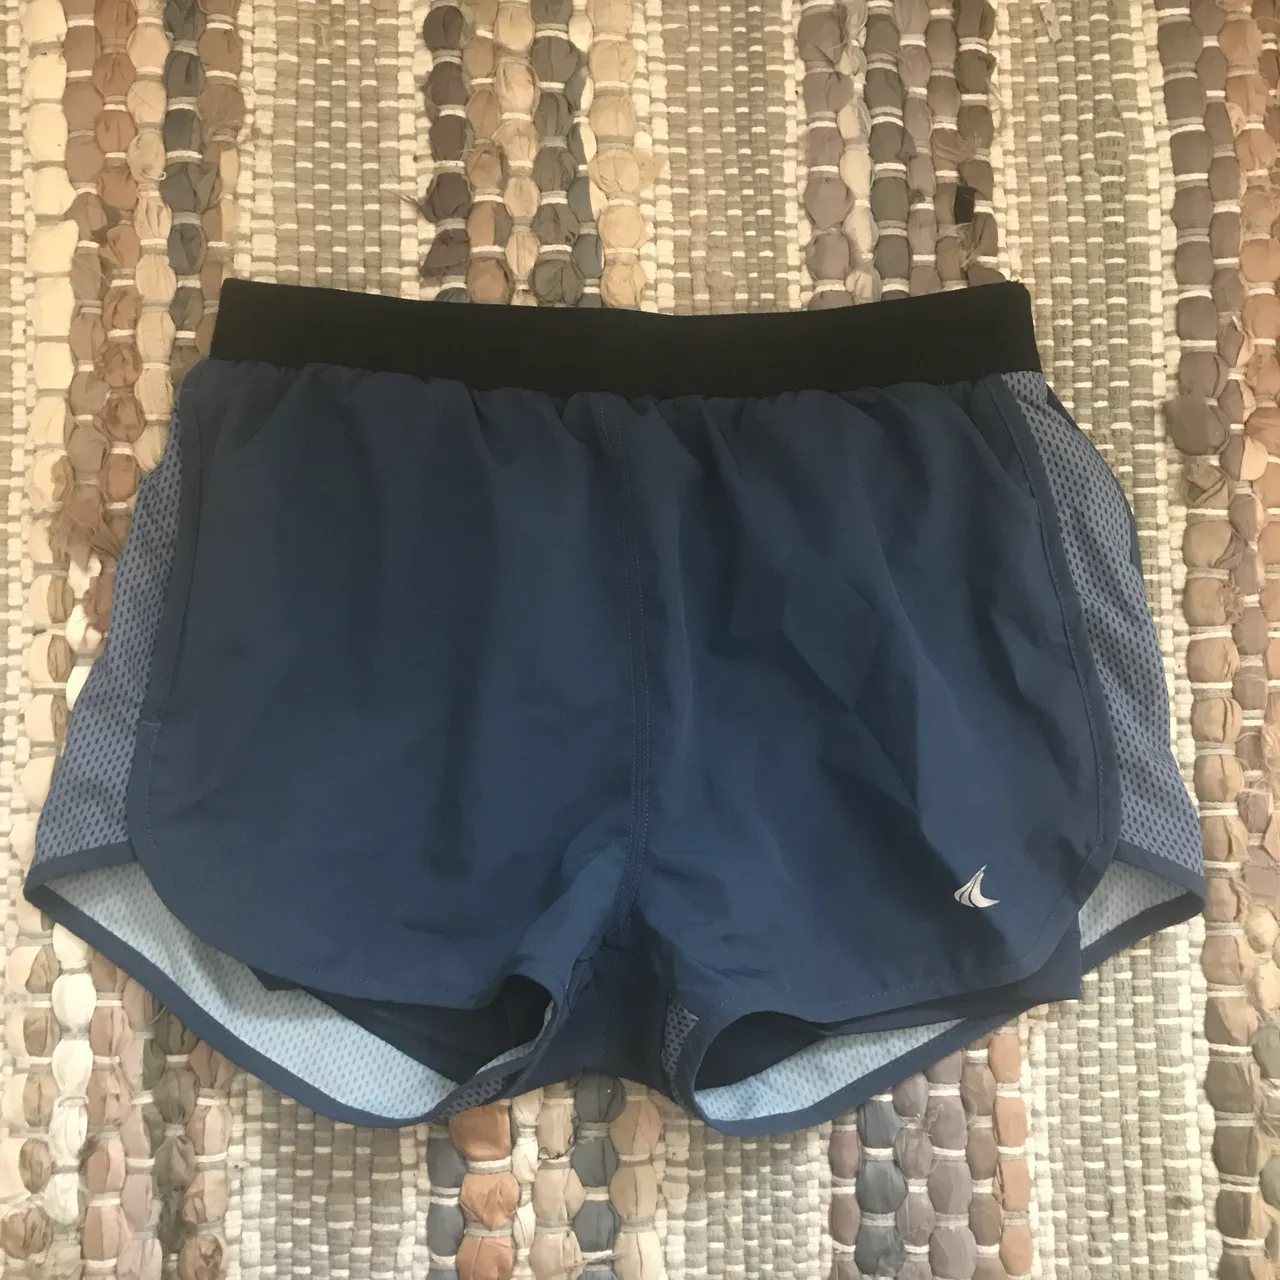 Practical and good looking running shorts photo 1